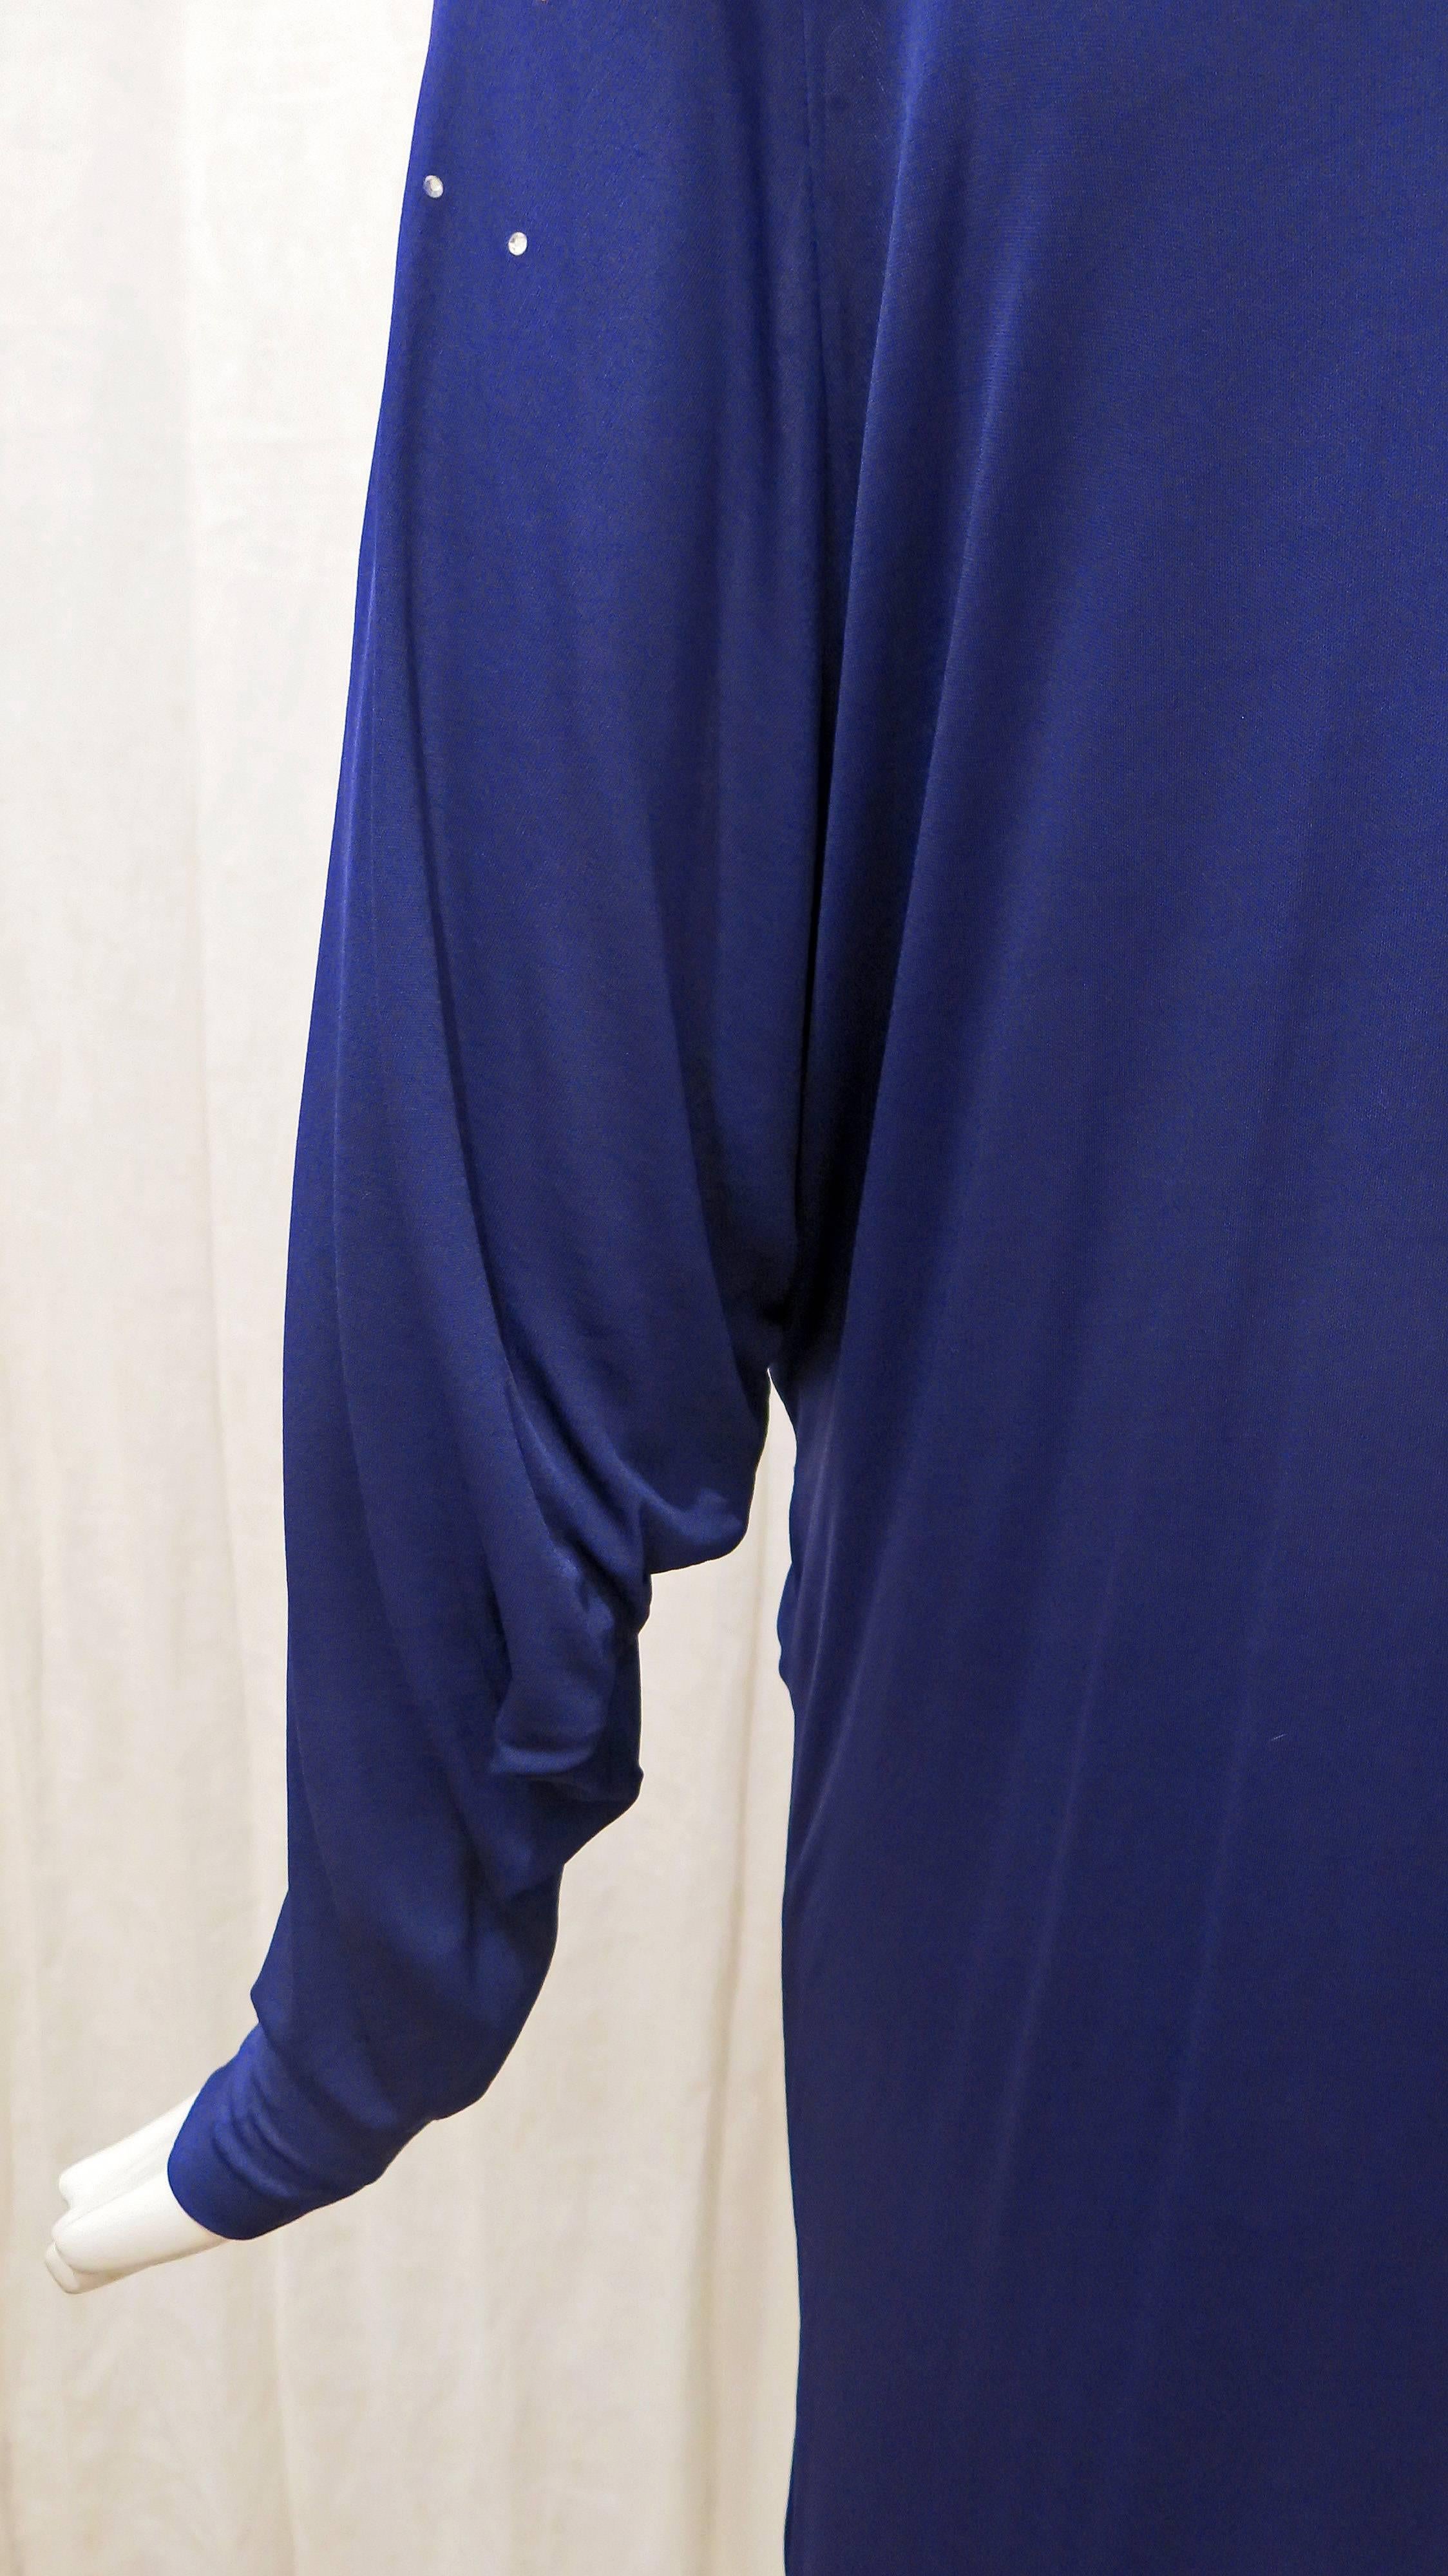 1980s Draped Rayon Jersey Don Kline Dress with Rhinestones In Excellent Condition For Sale In Brooklyn, NY